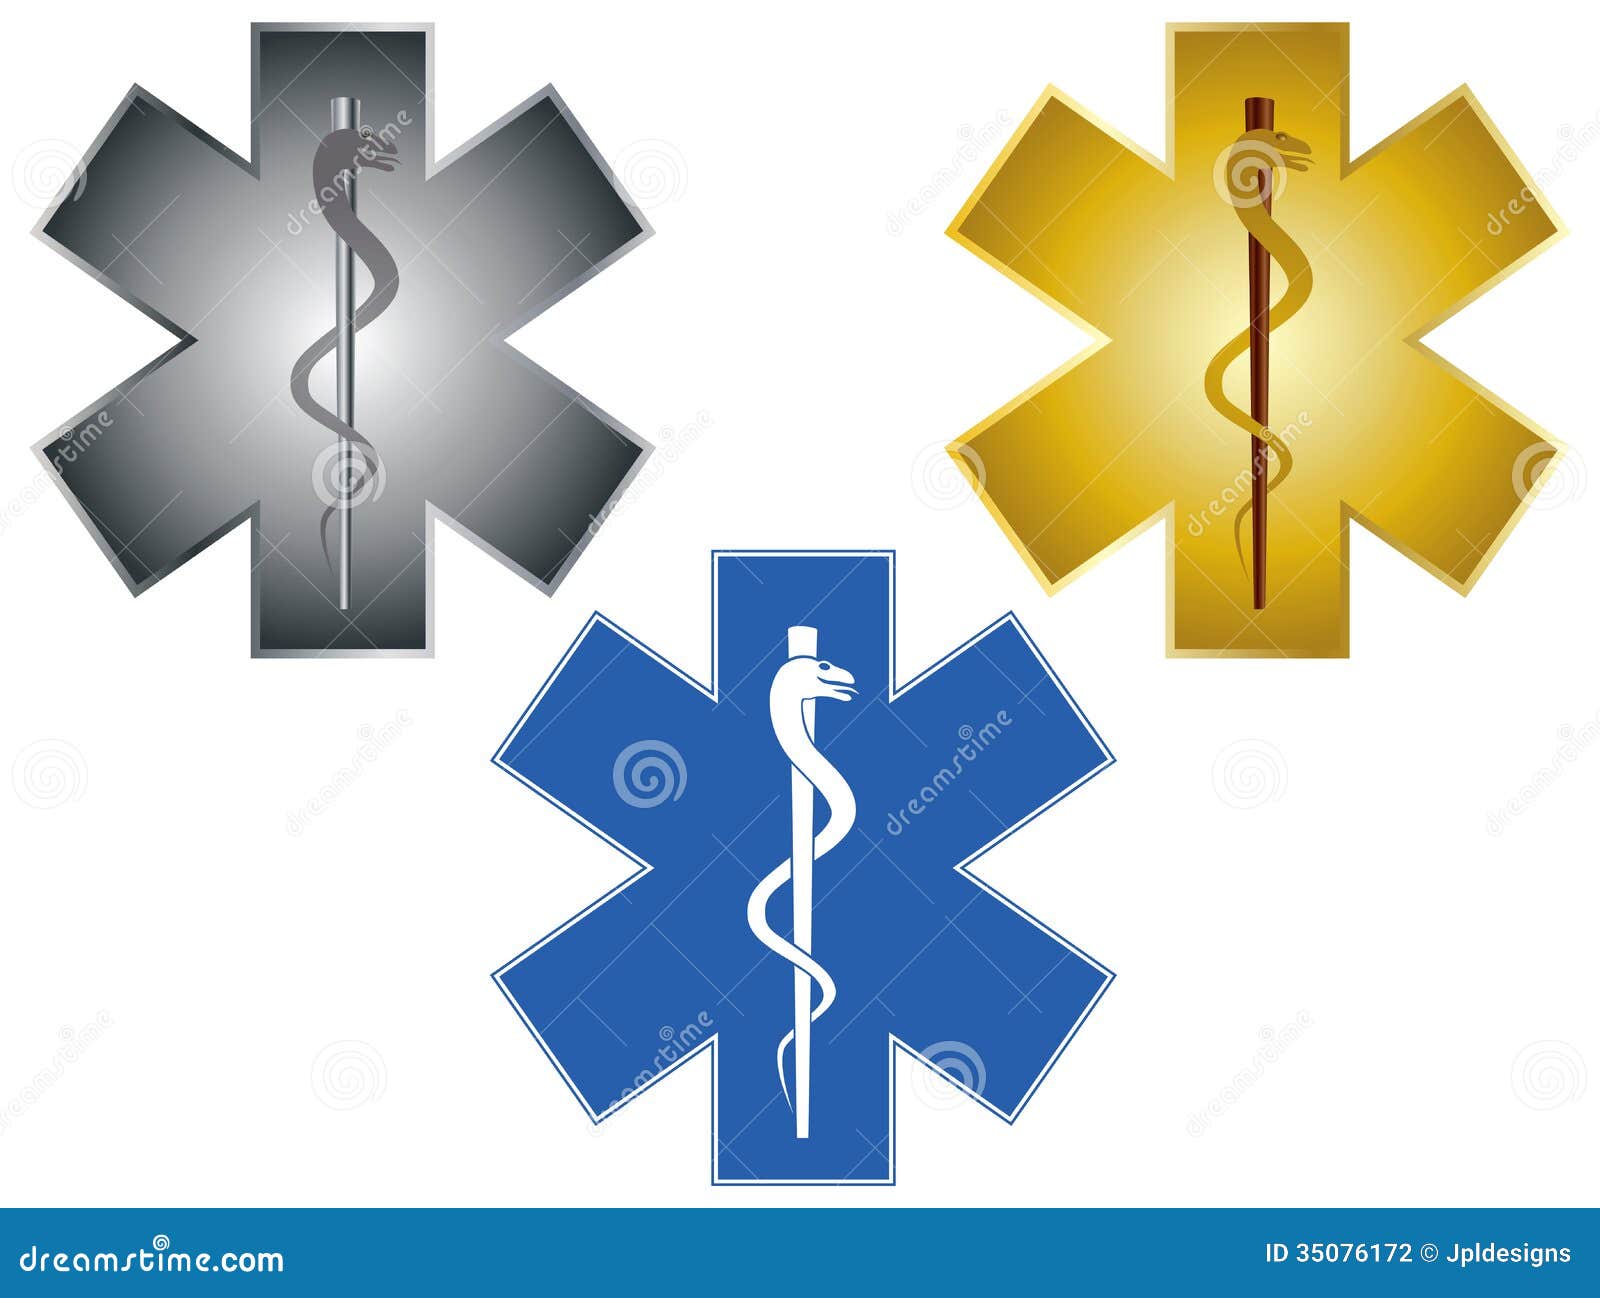 star of life rod of asclepius 